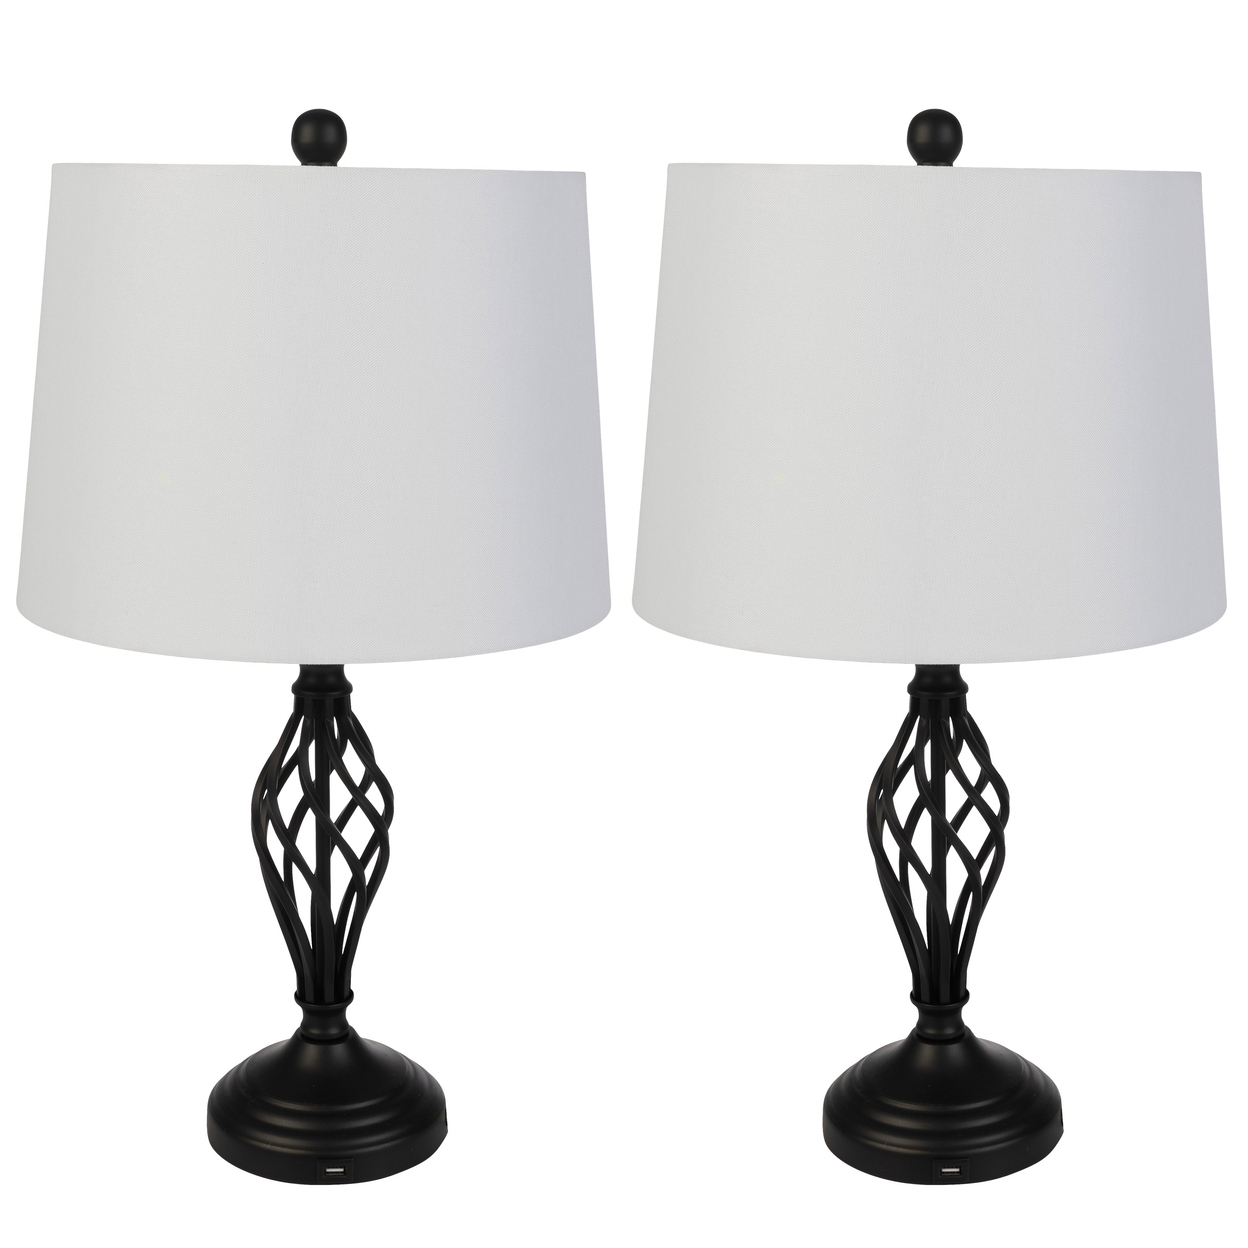 Set Of 2 Table Lamps Modern Lamps With USB Charging Ports LED Bulbs Room Black